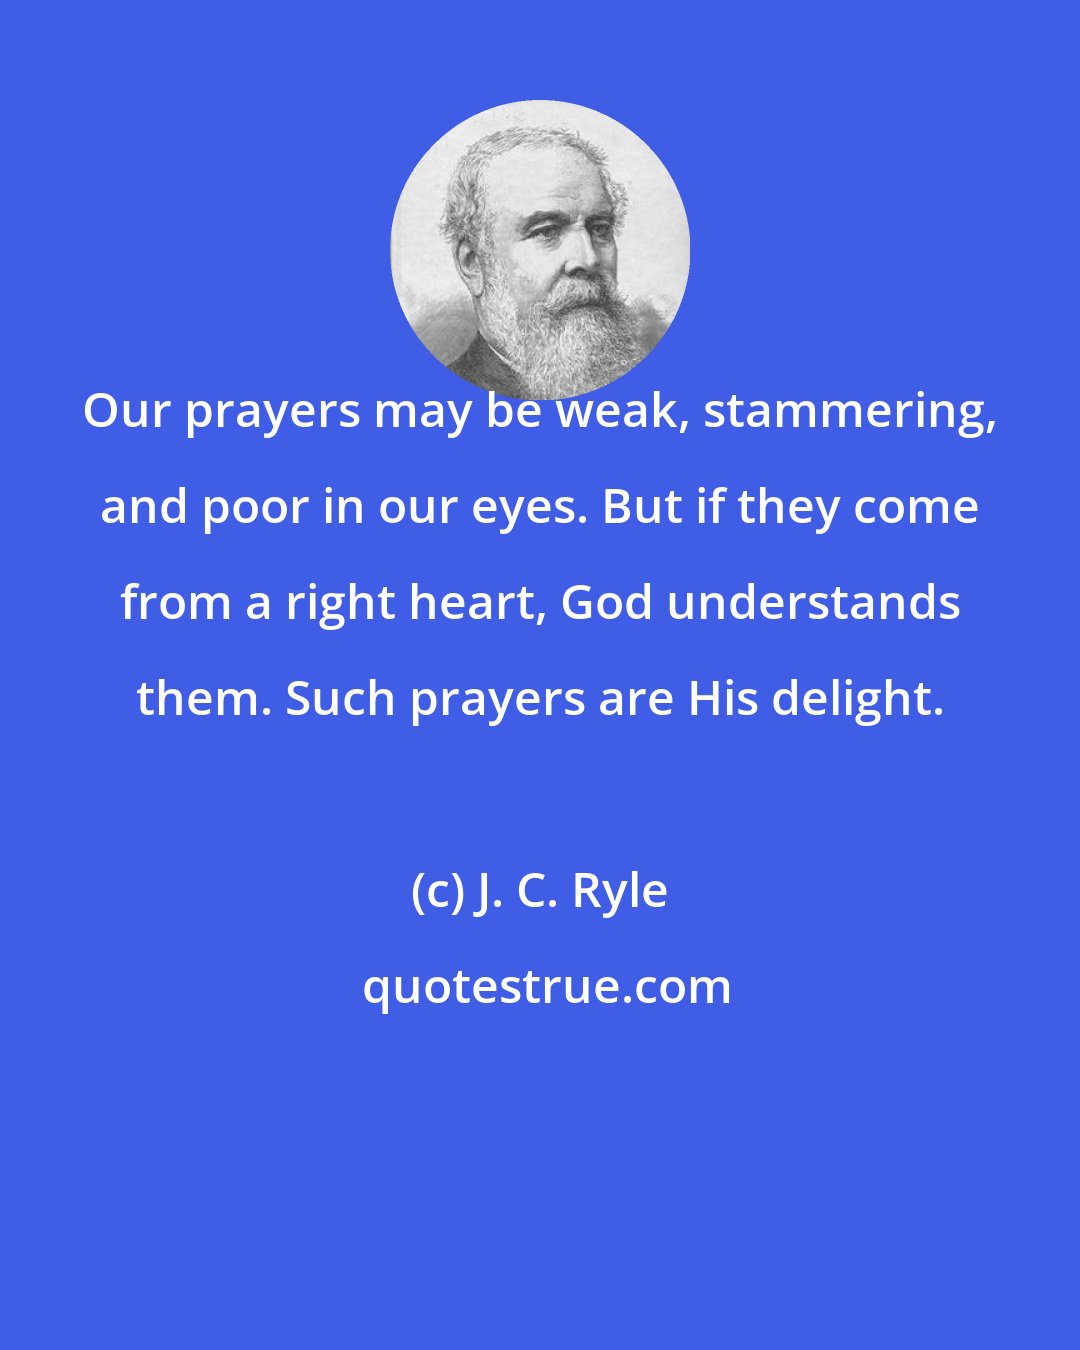 J. C. Ryle: Our prayers may be weak, stammering, and poor in our eyes. But if they come from a right heart, God understands them. Such prayers are His delight.